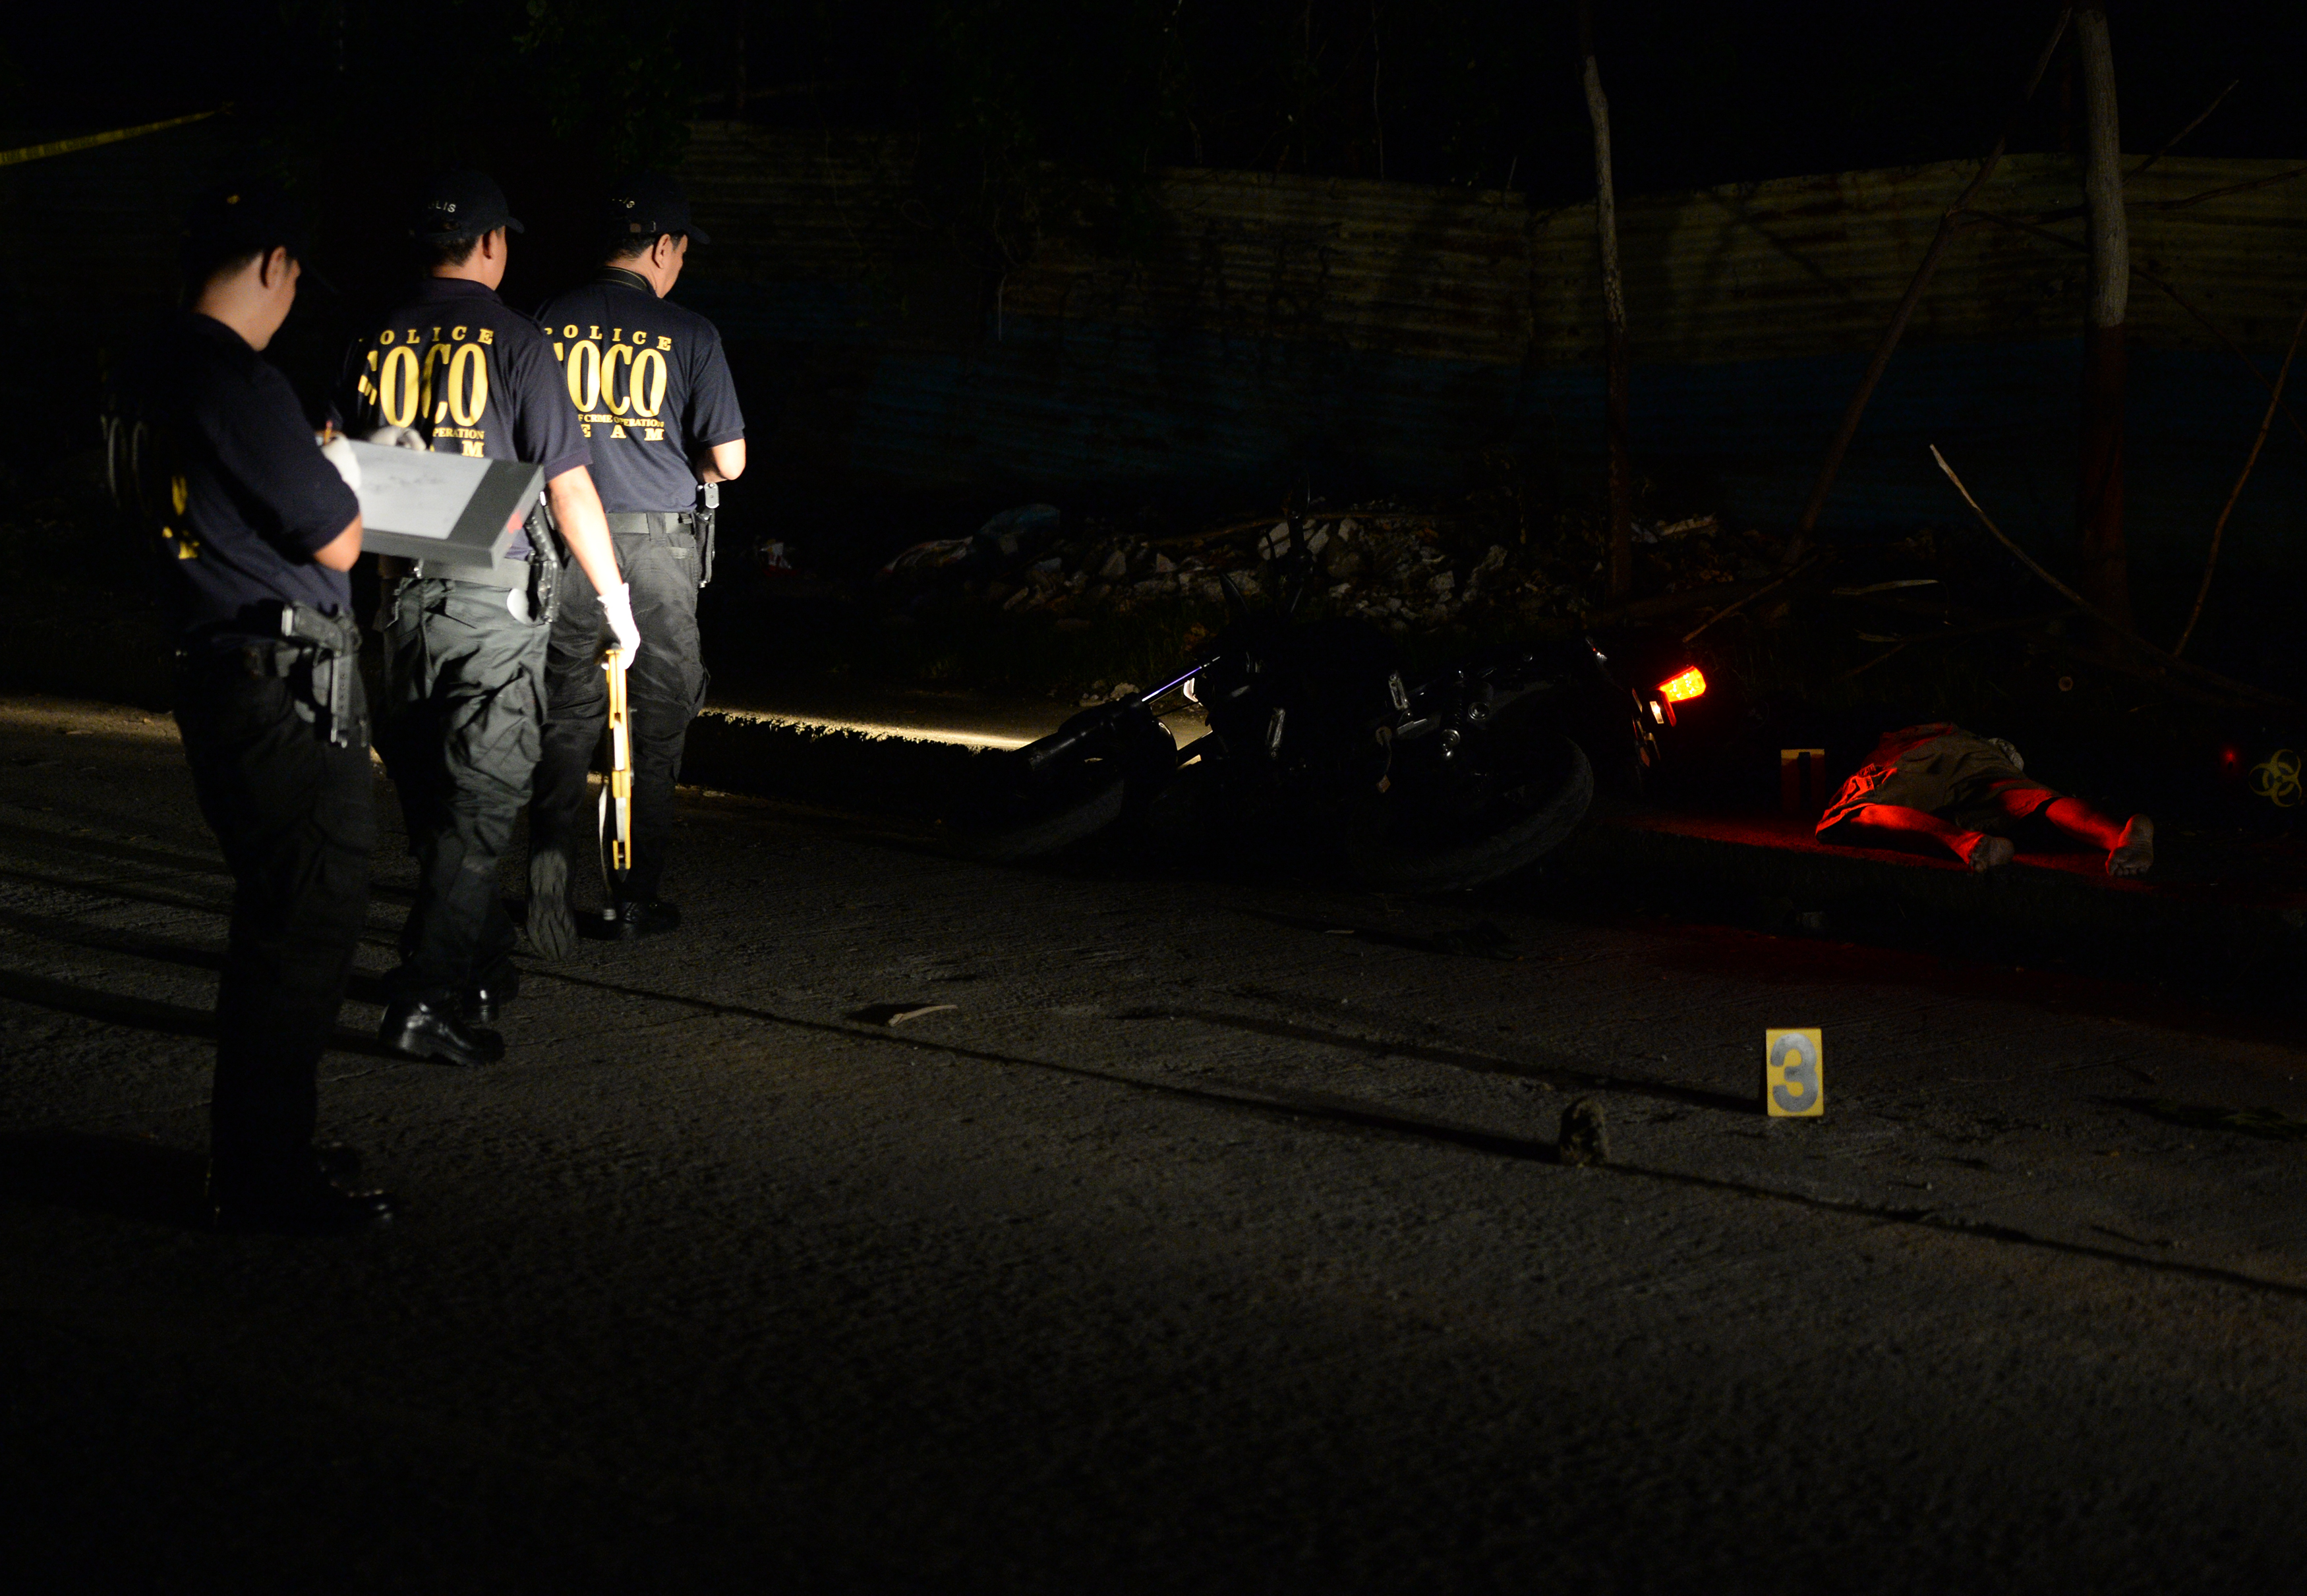 Police members of a Scene of the Crime Operatives (SOCO) team arrive to investigate the site where the bodies of suspected drug pushers (R) lie sprawled on the pavement next to a motorcycle, killed after an encounter with police in the Pasig City district of suburban Manila on September 23, 2016. Philippine President Rodrigo Duterte on September 22 invited the United Nations' chief and international human rights experts to investigate allegations of widespread extrajudicial killings, but insisted they also face him in a public debate. / AFP PHOTO / TED ALJIBE